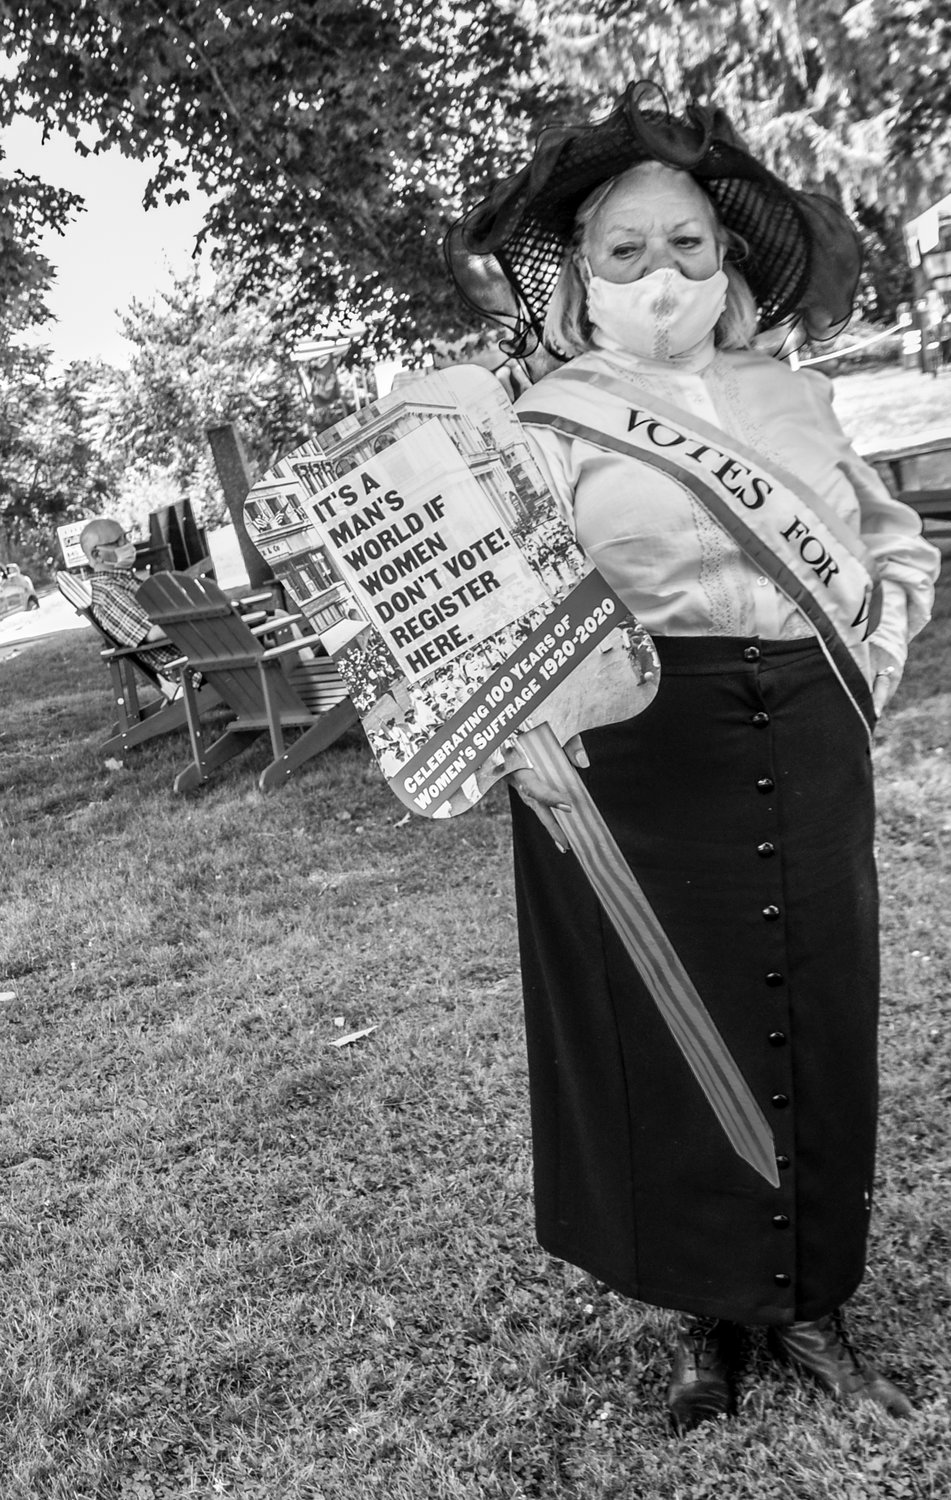 Celebrating 100 years of suffrage, the Delaware Company’s Debra Conway was decked out in black and white, encouraging folks to “vote where their heart is” at the farmers’ market in Barryville, NY last Saturday.